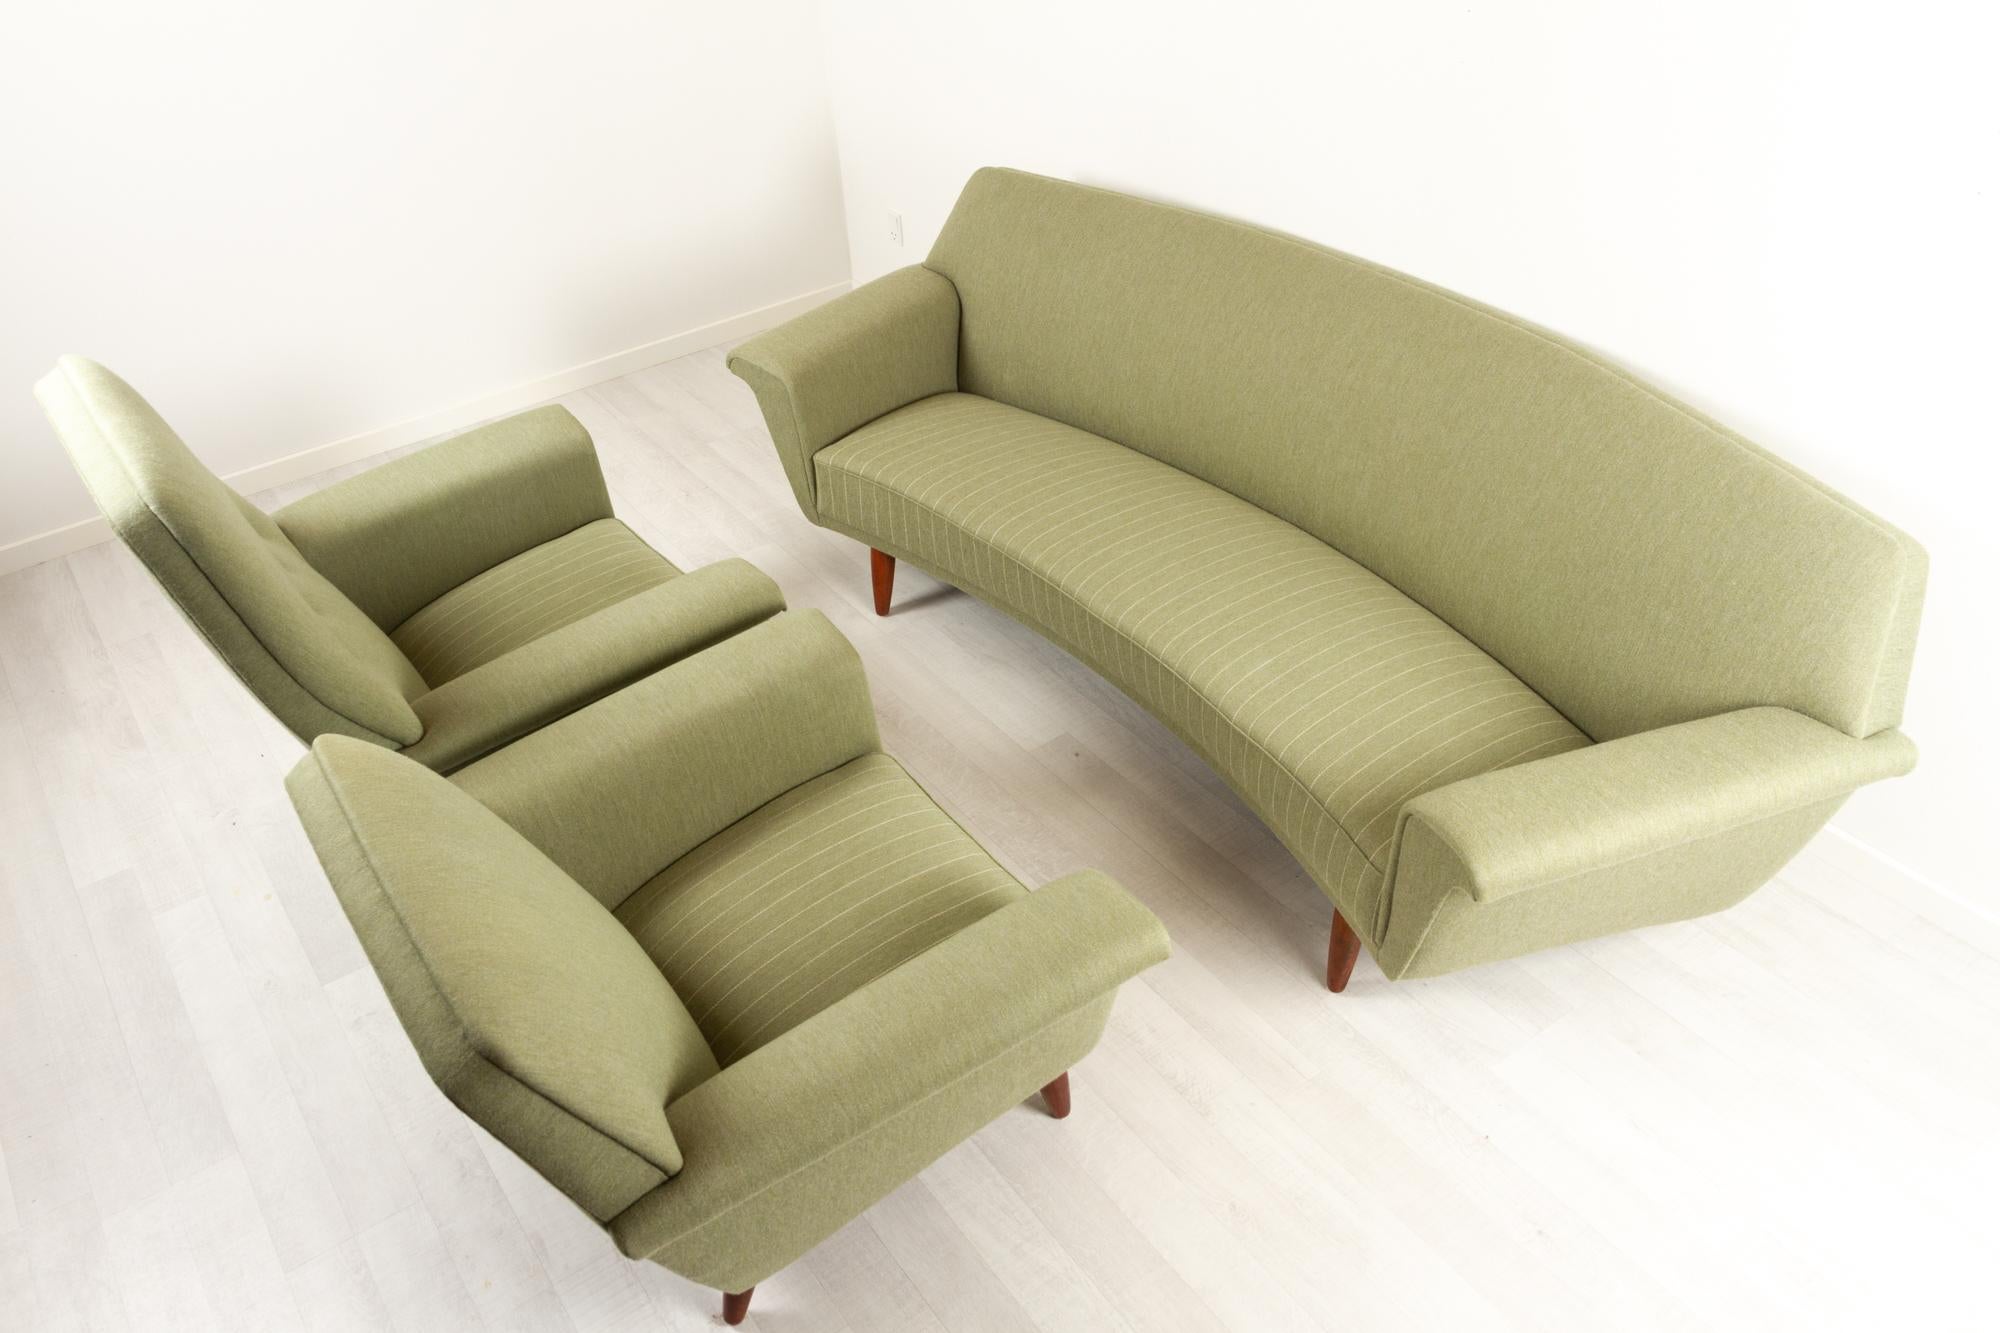 Vintage Danish Living Room Set by G. Thams for Vejen Polstermøbelfabrik, 1960s
Model 53 sofa set designed in the early 1960s by Danish architect Georg Thams. This set consists of a curved banana shaped 3-seater sofa , a high back lounge chair and a